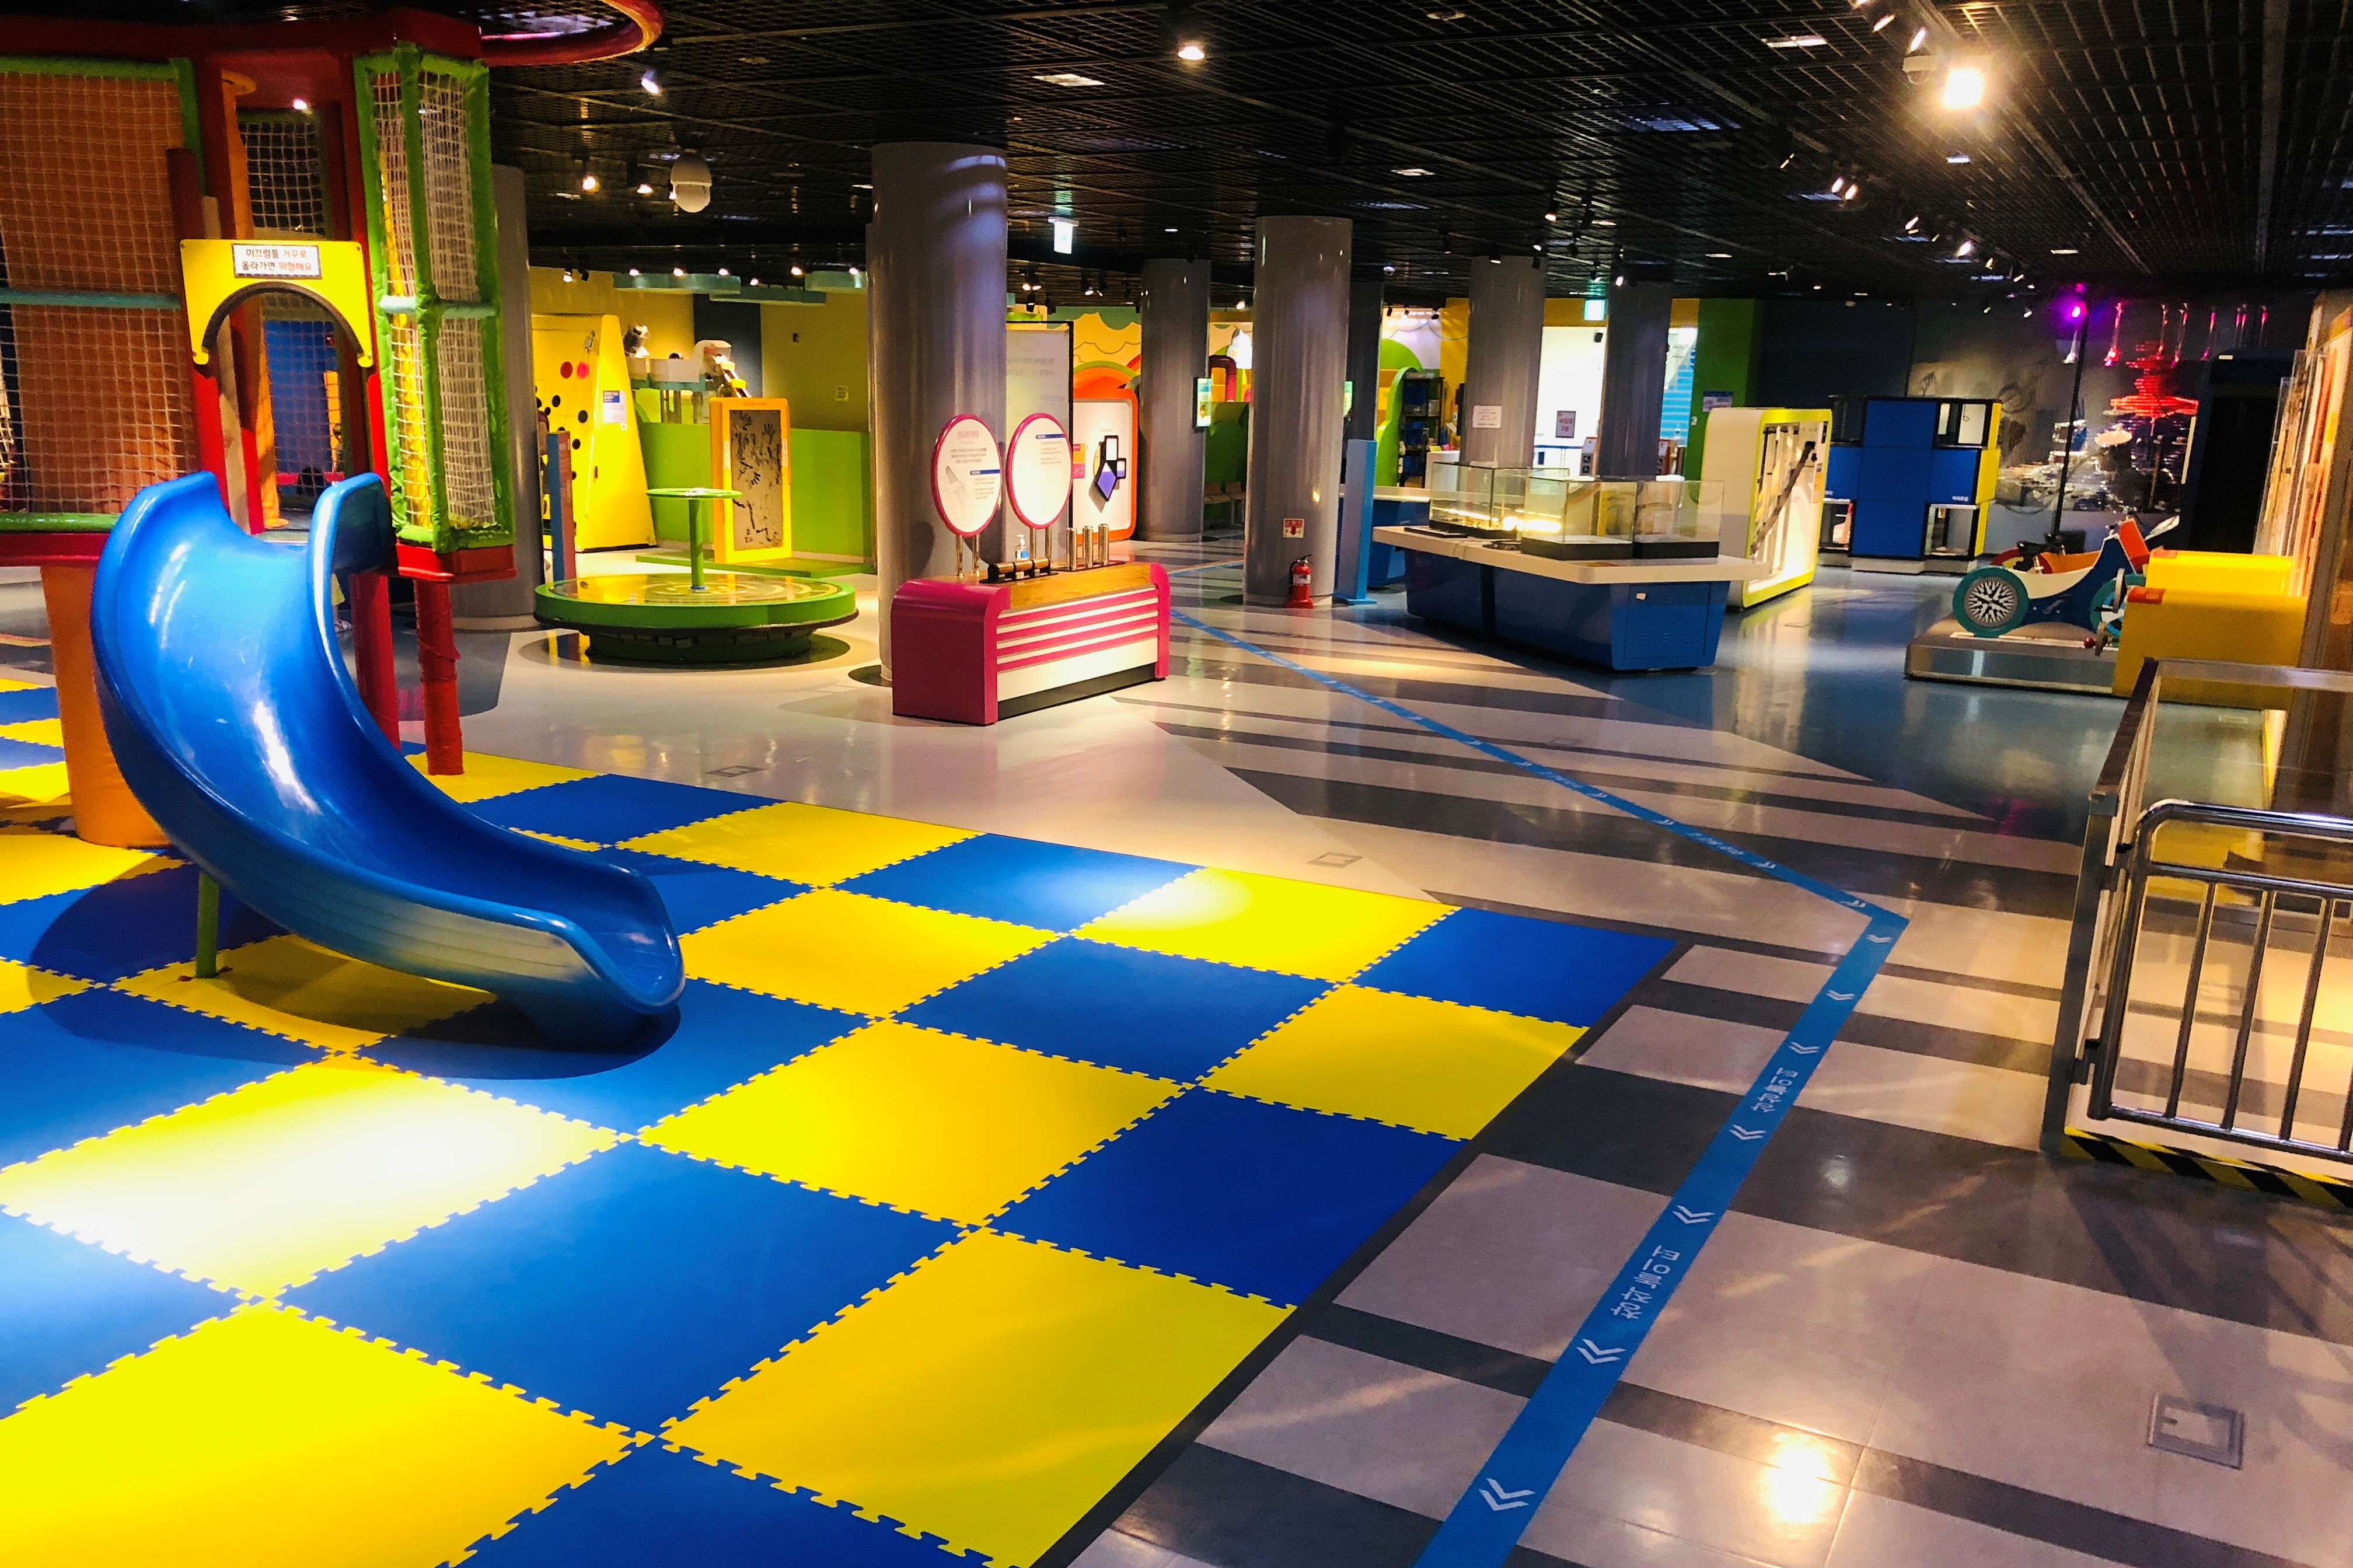 National Children’s Science Center4 : Interior view of the National Children's Science Center that provides children's play facilities and mats